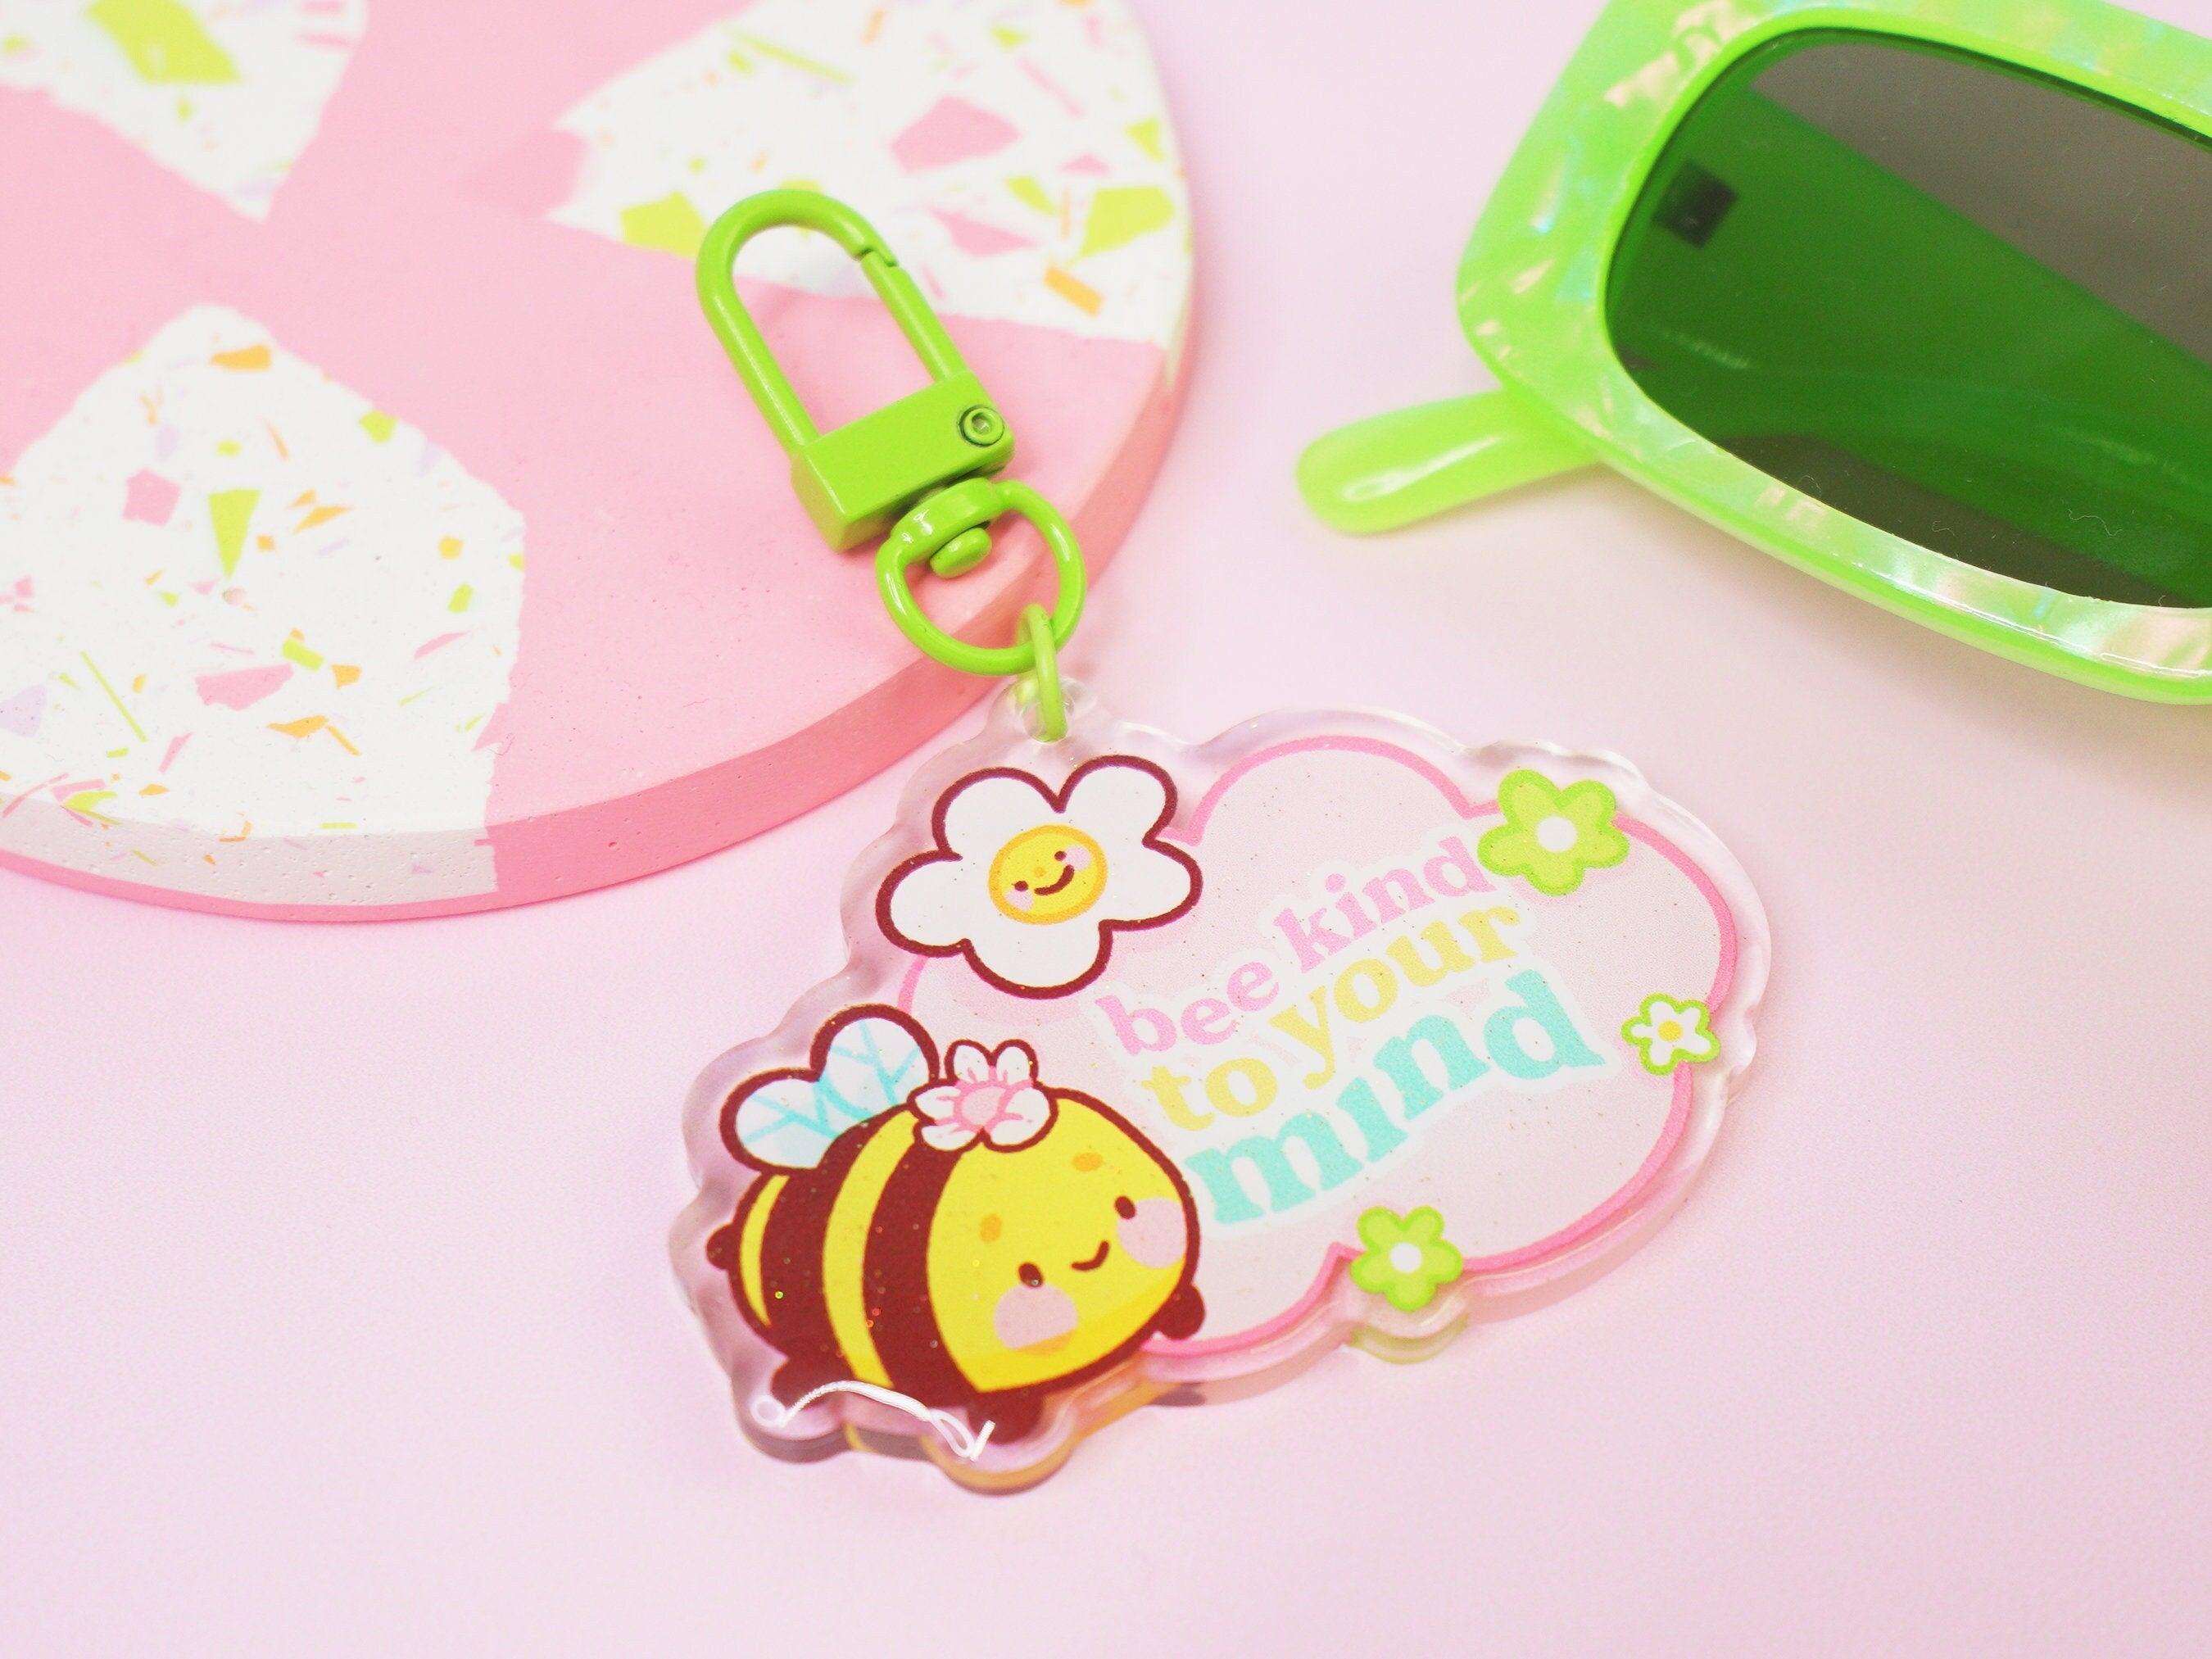 Bumblebutt Acrylic Keyring with double-sided design and glitter epoxy finish, ideal for bags or keys.